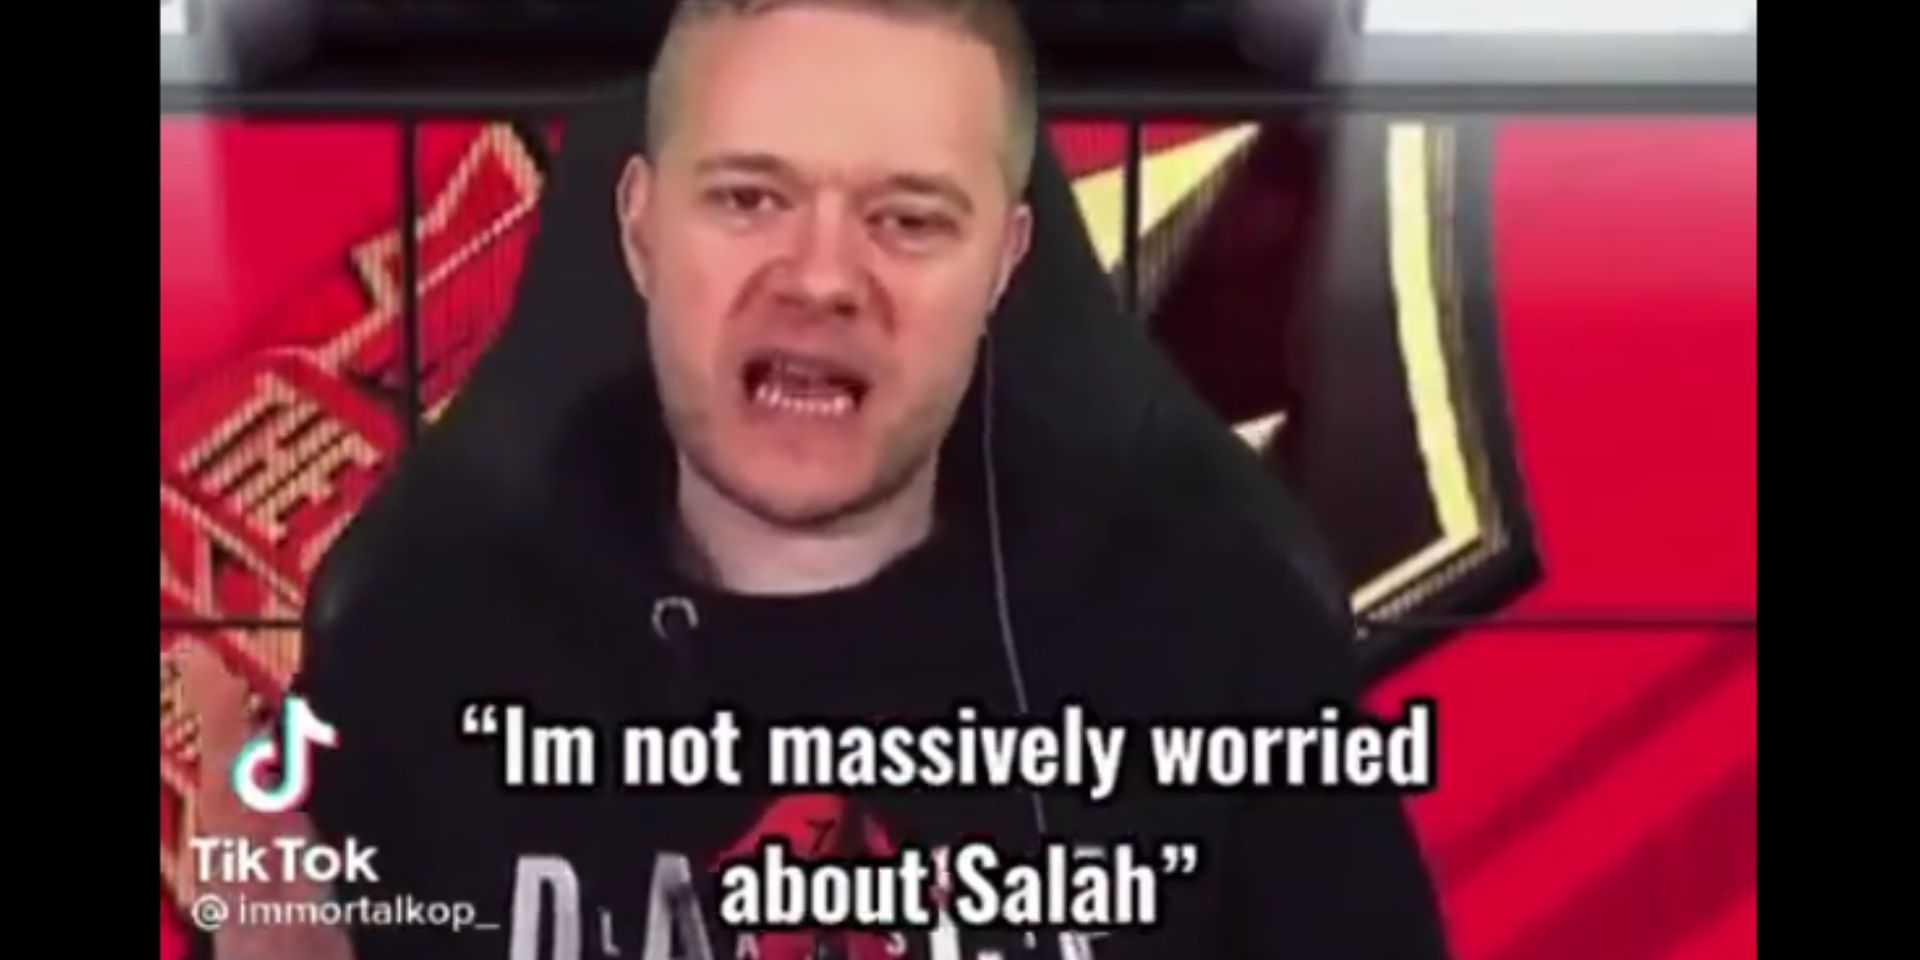 “I’m not massively worried about Salah” – Mark Goldbridge’s comments about Mo Salah revisited ahead of our return to Old Trafford